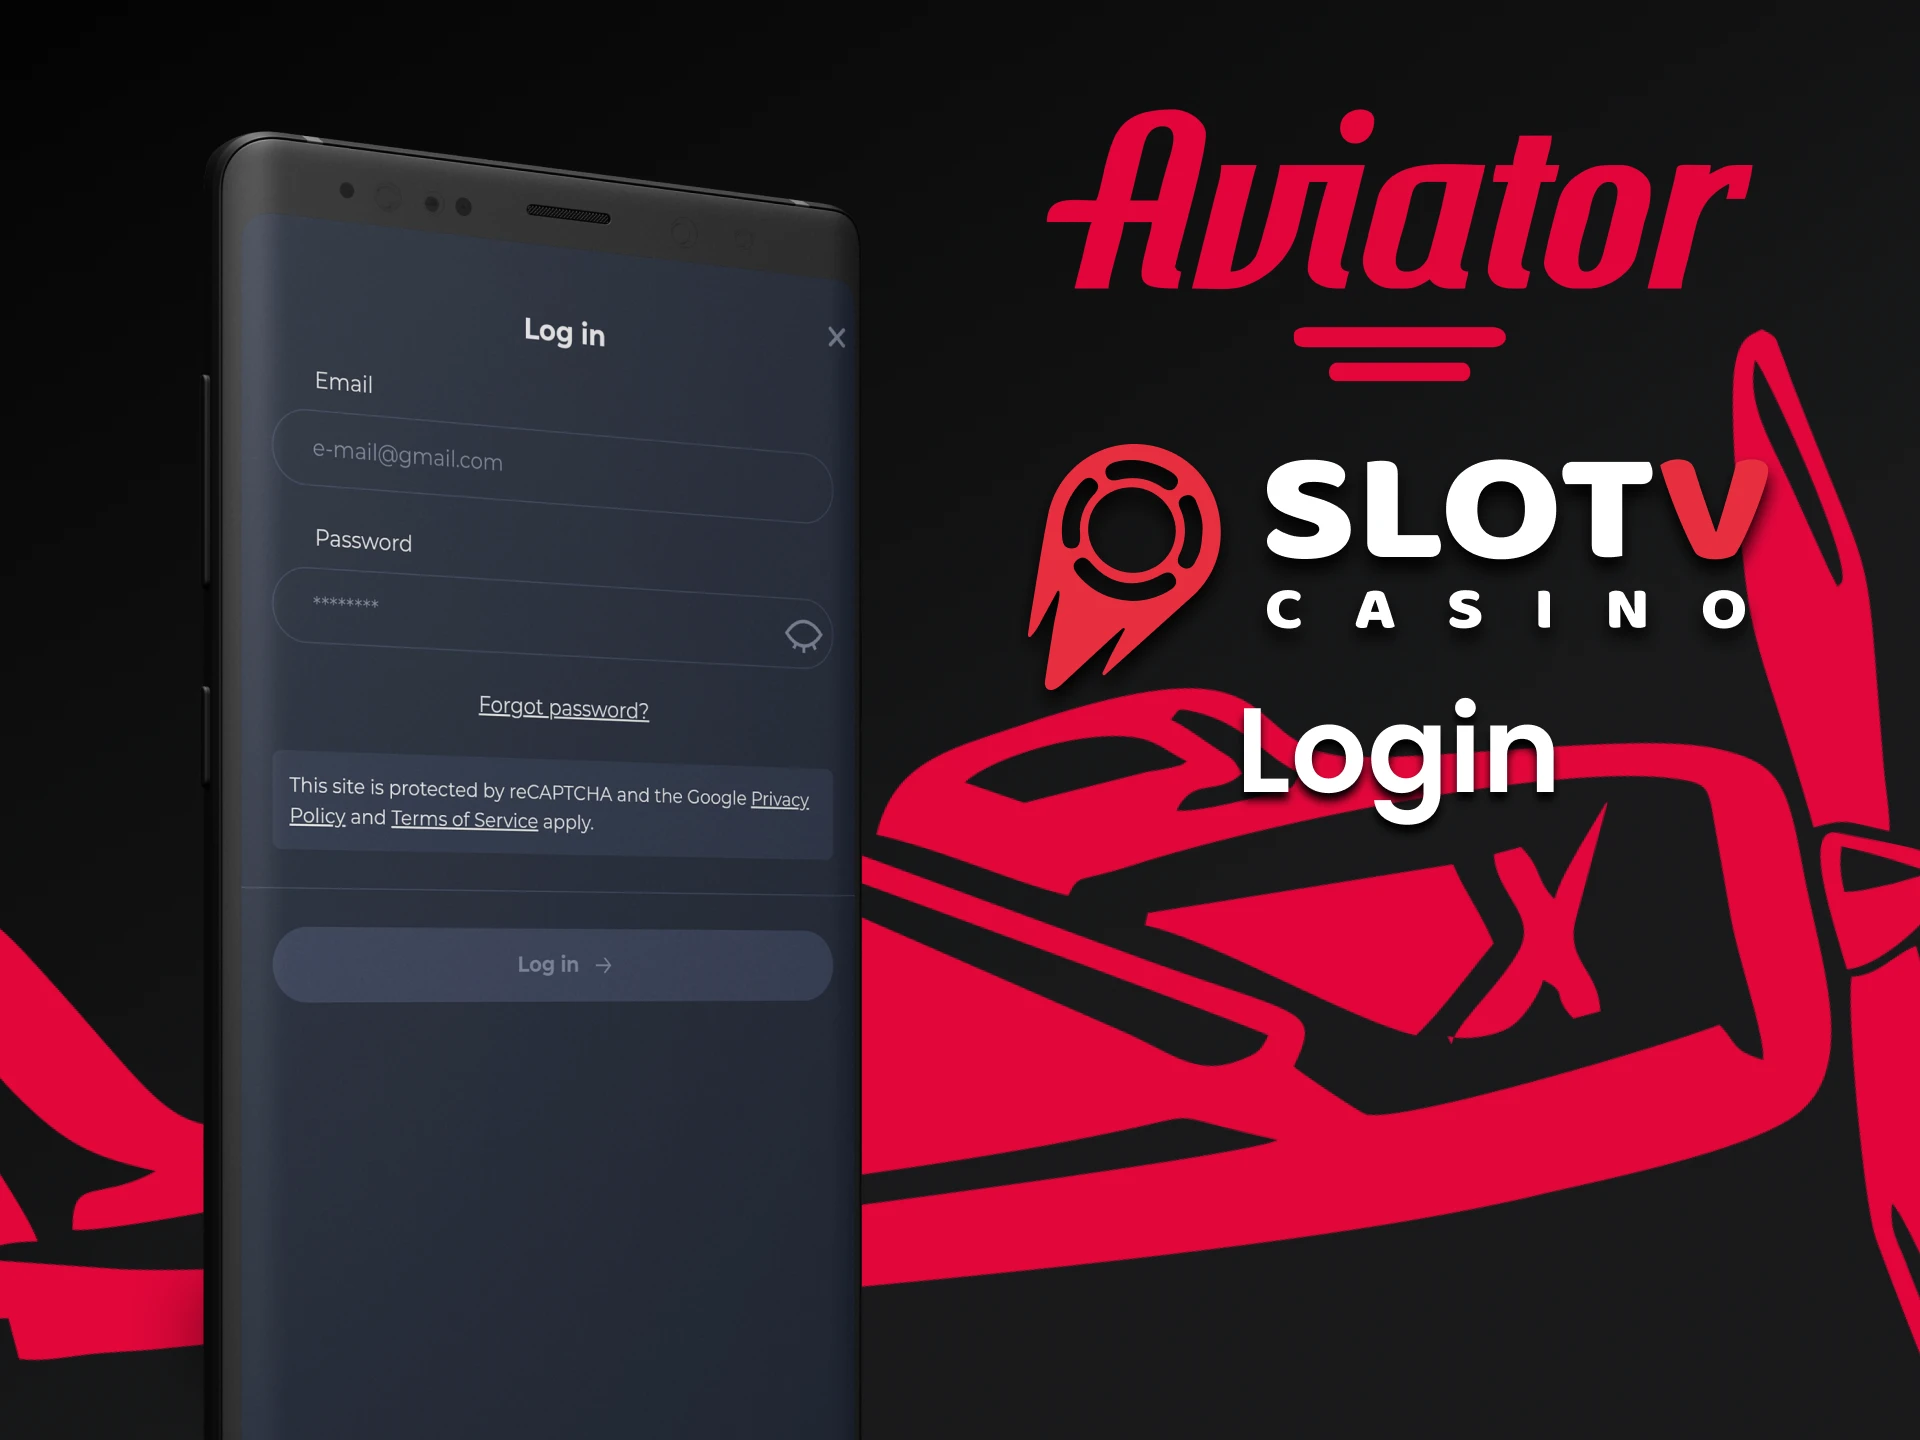 Log in to your account in the SLotV app to play Aviator.